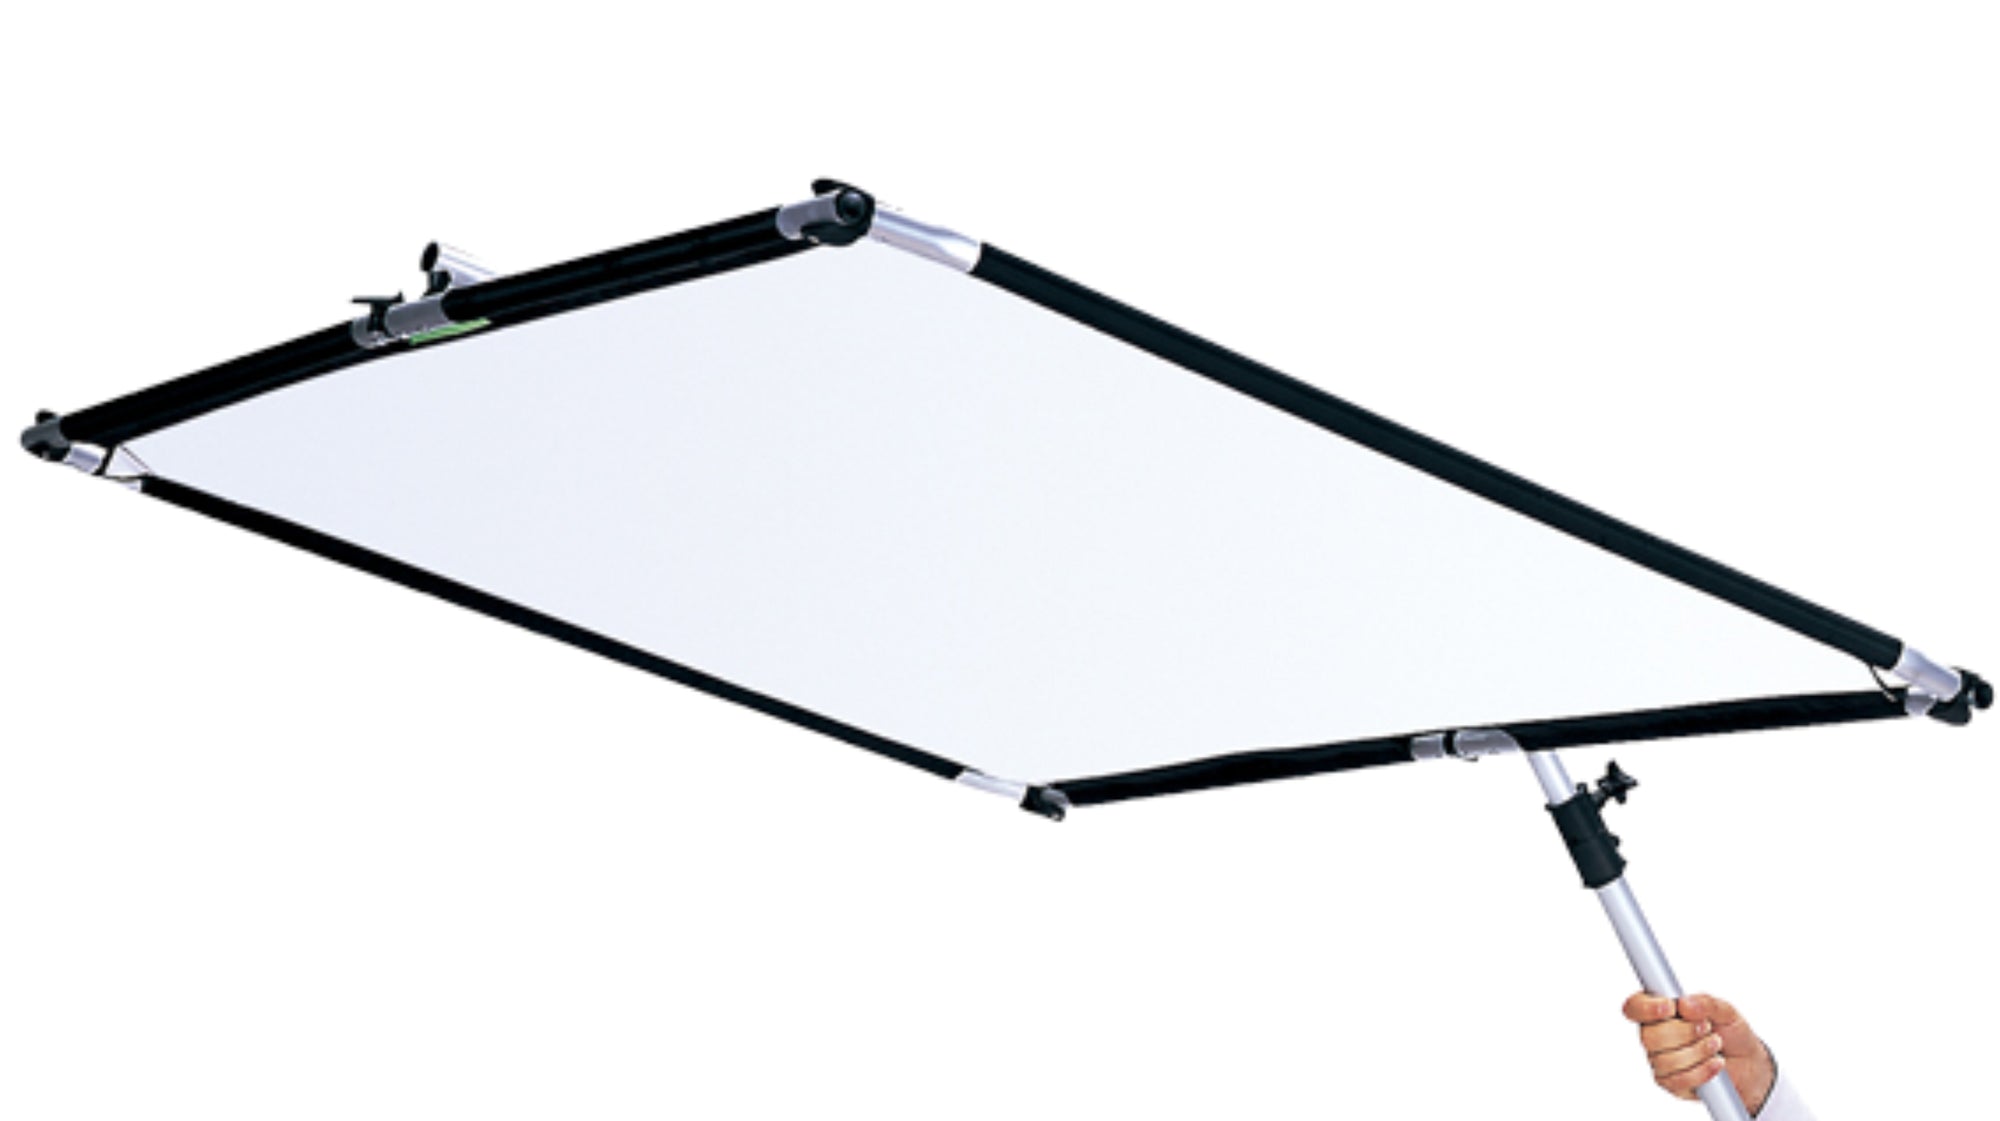 FFB-5x3.2’ Fast Frame Collapsible Reflector Panel